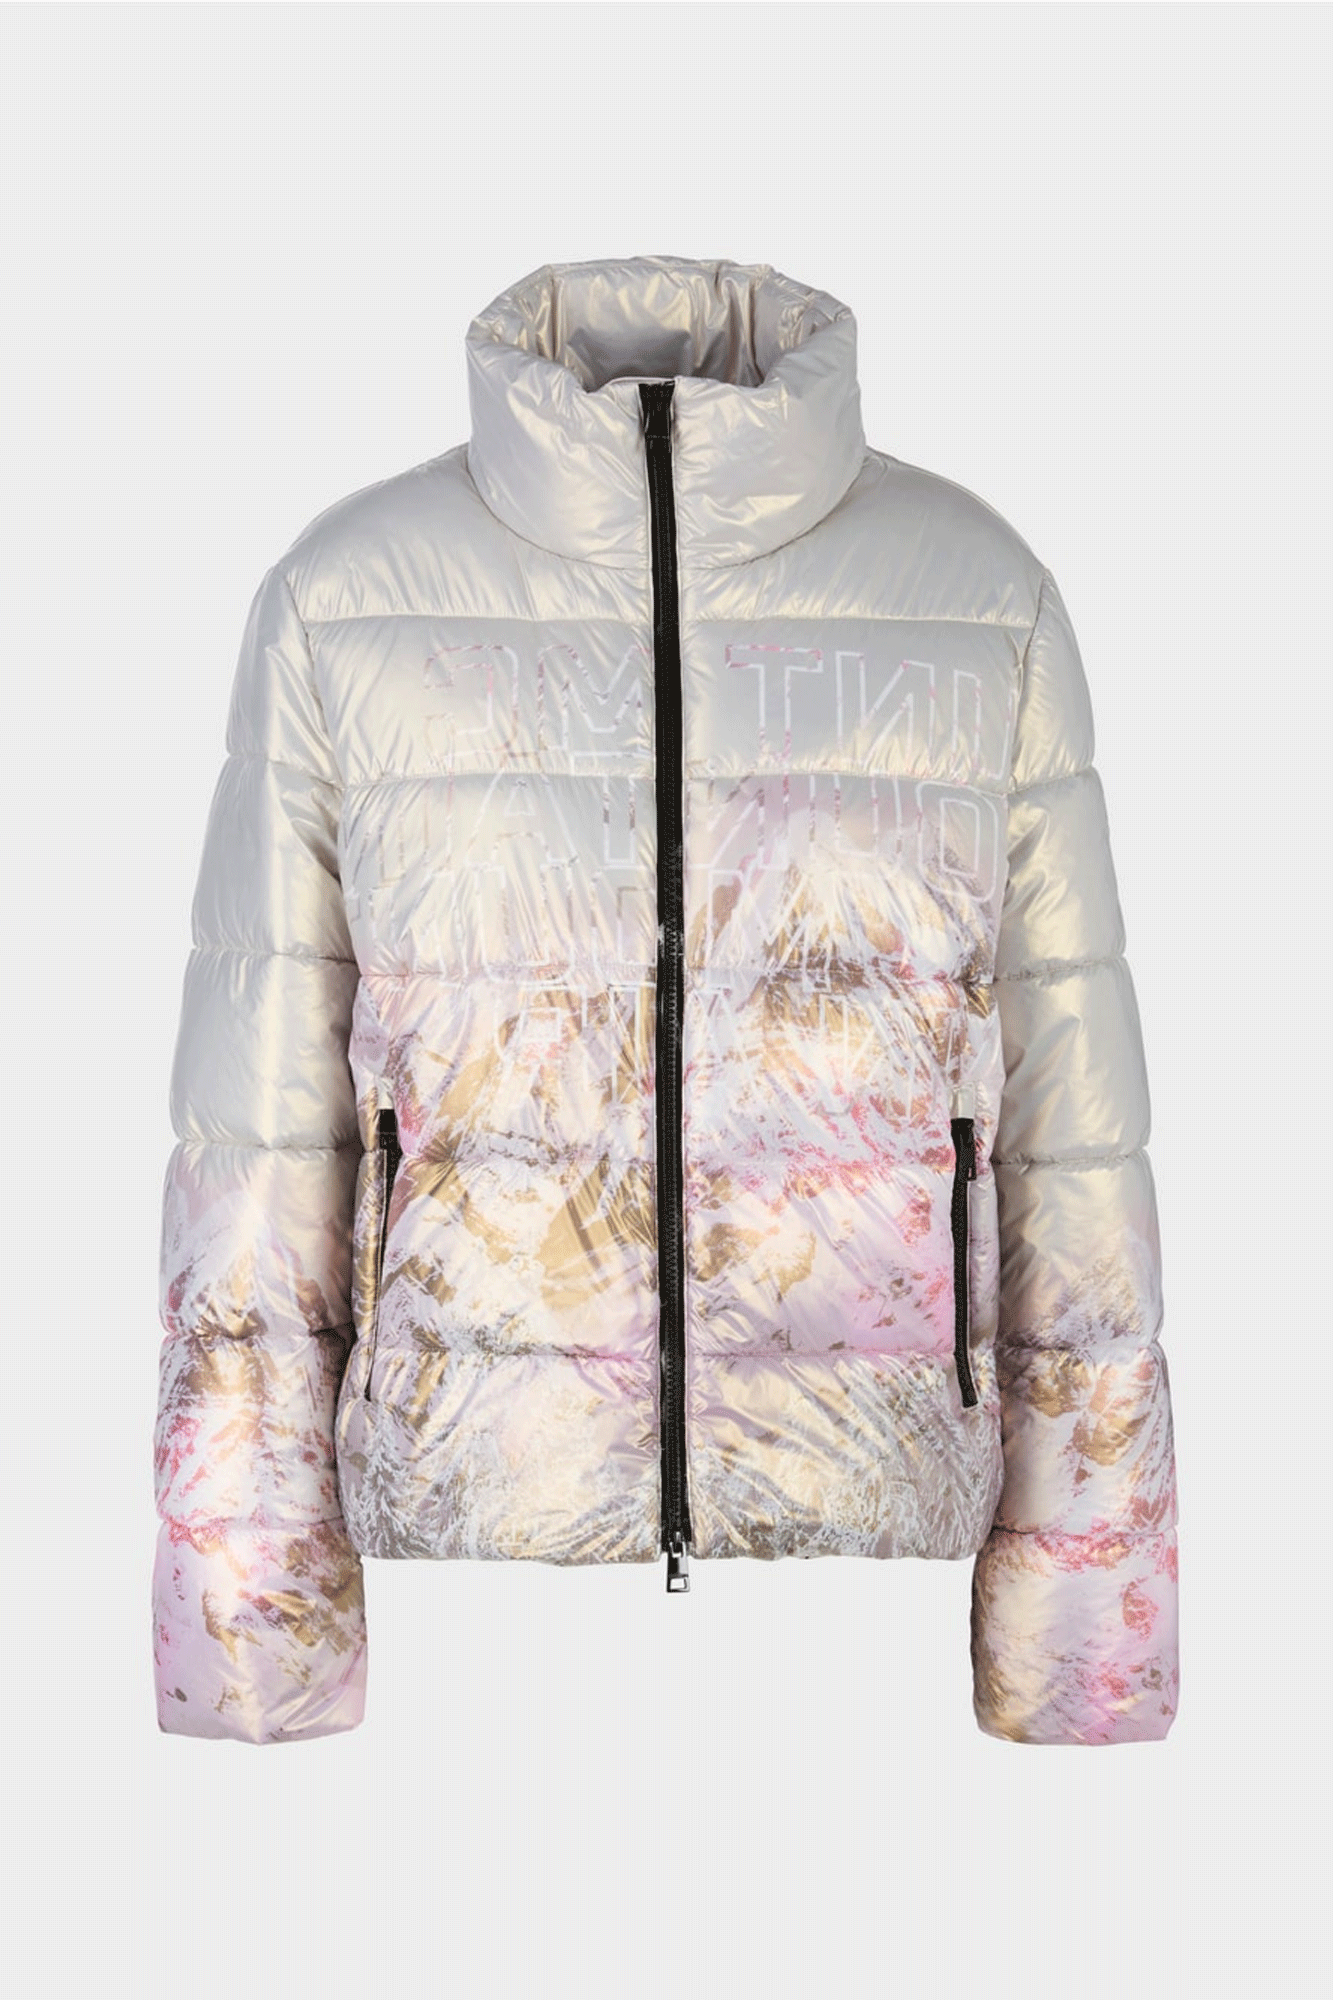 Stay warm and dry with this sophisticated outdoor jacket from Marc Cain. With features like breathable fabric, and a water repellent finish, the Mountain Air jacket offers ultimate protection against the elements. Featuring adjustable zip pockets and a chin guard, this jacket is perfect for any outdoor activities.